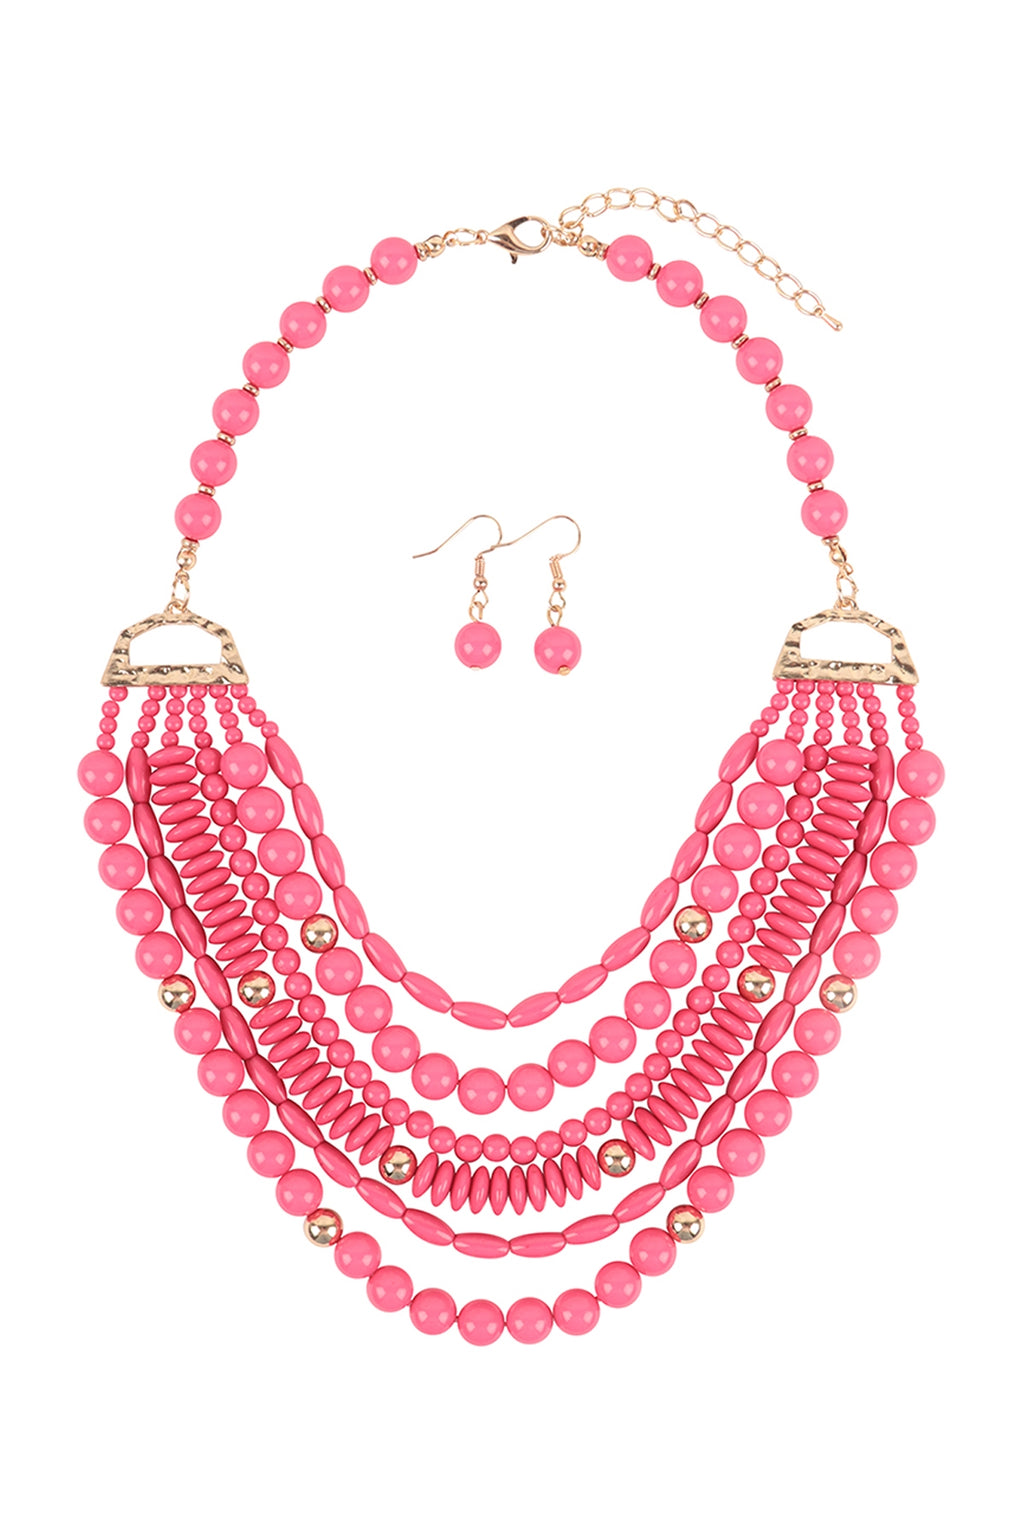 Layered Bib Bohemian Statement Necklace and Earrings Set Pink - Pack of 6